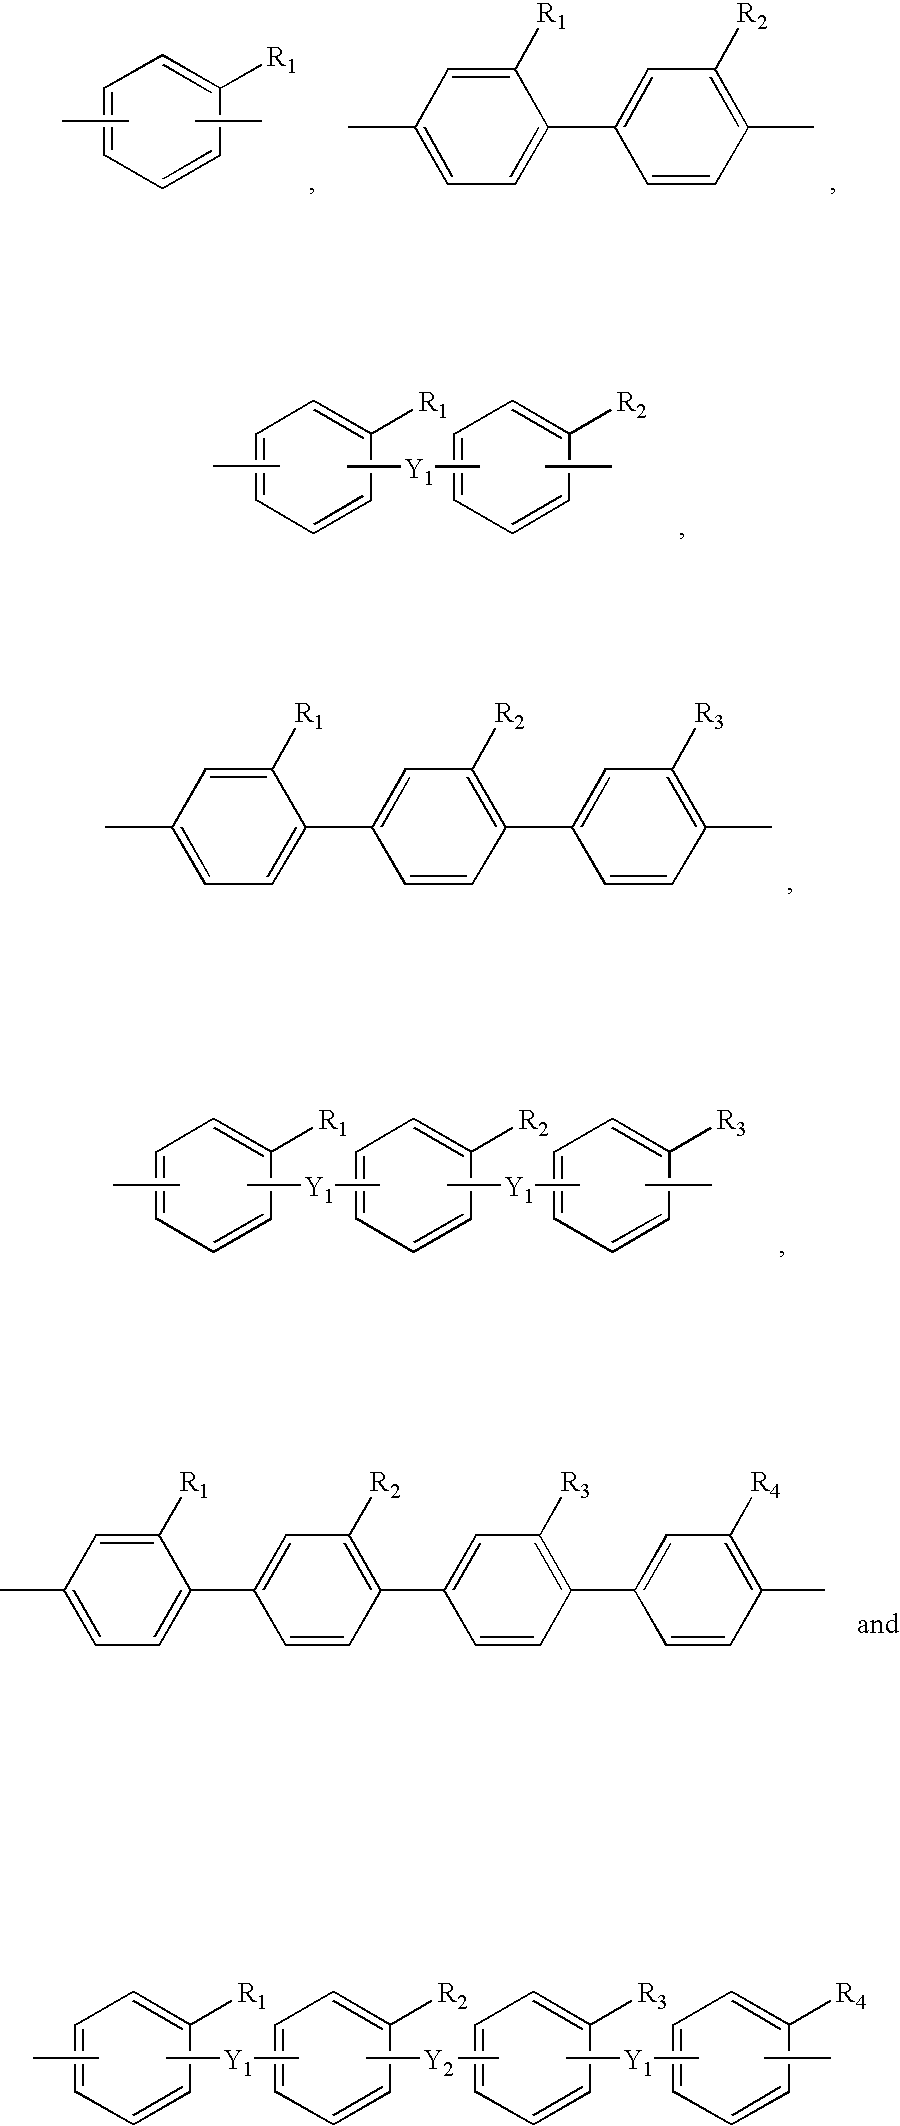 Polyimide copolymer and methods for preparing the same